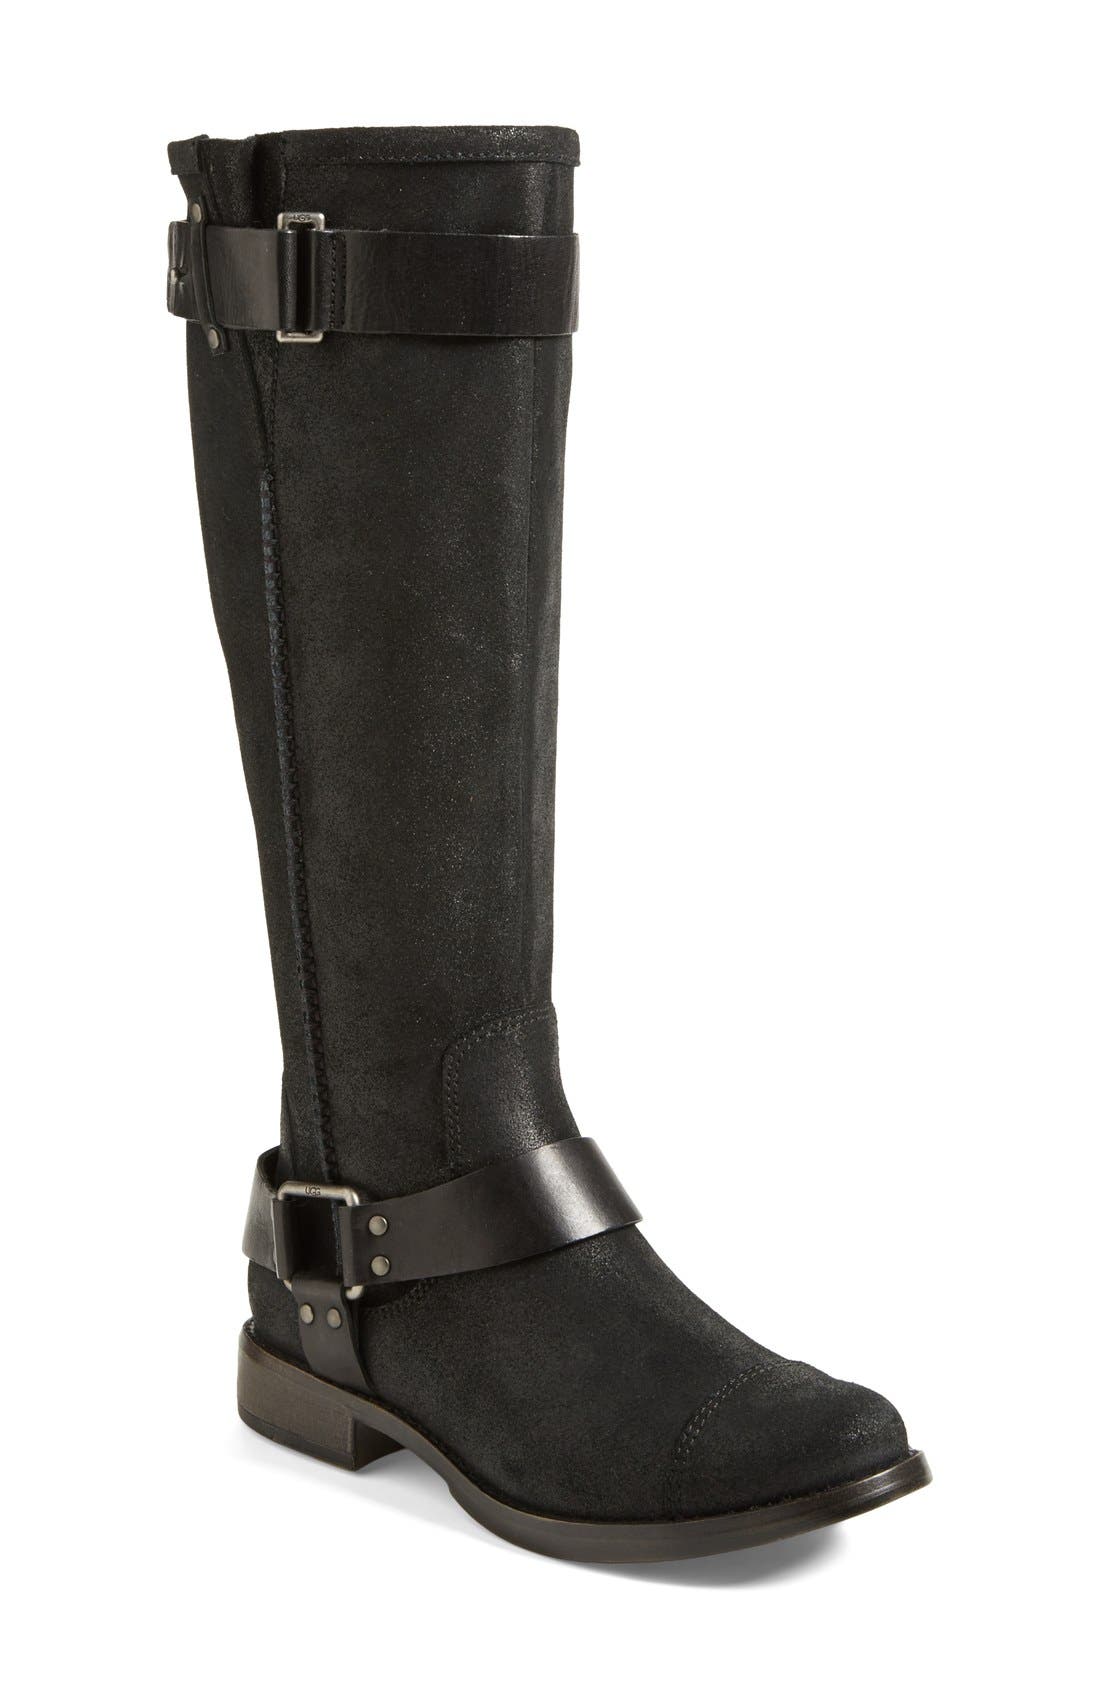 ugg riding boots nordstrom